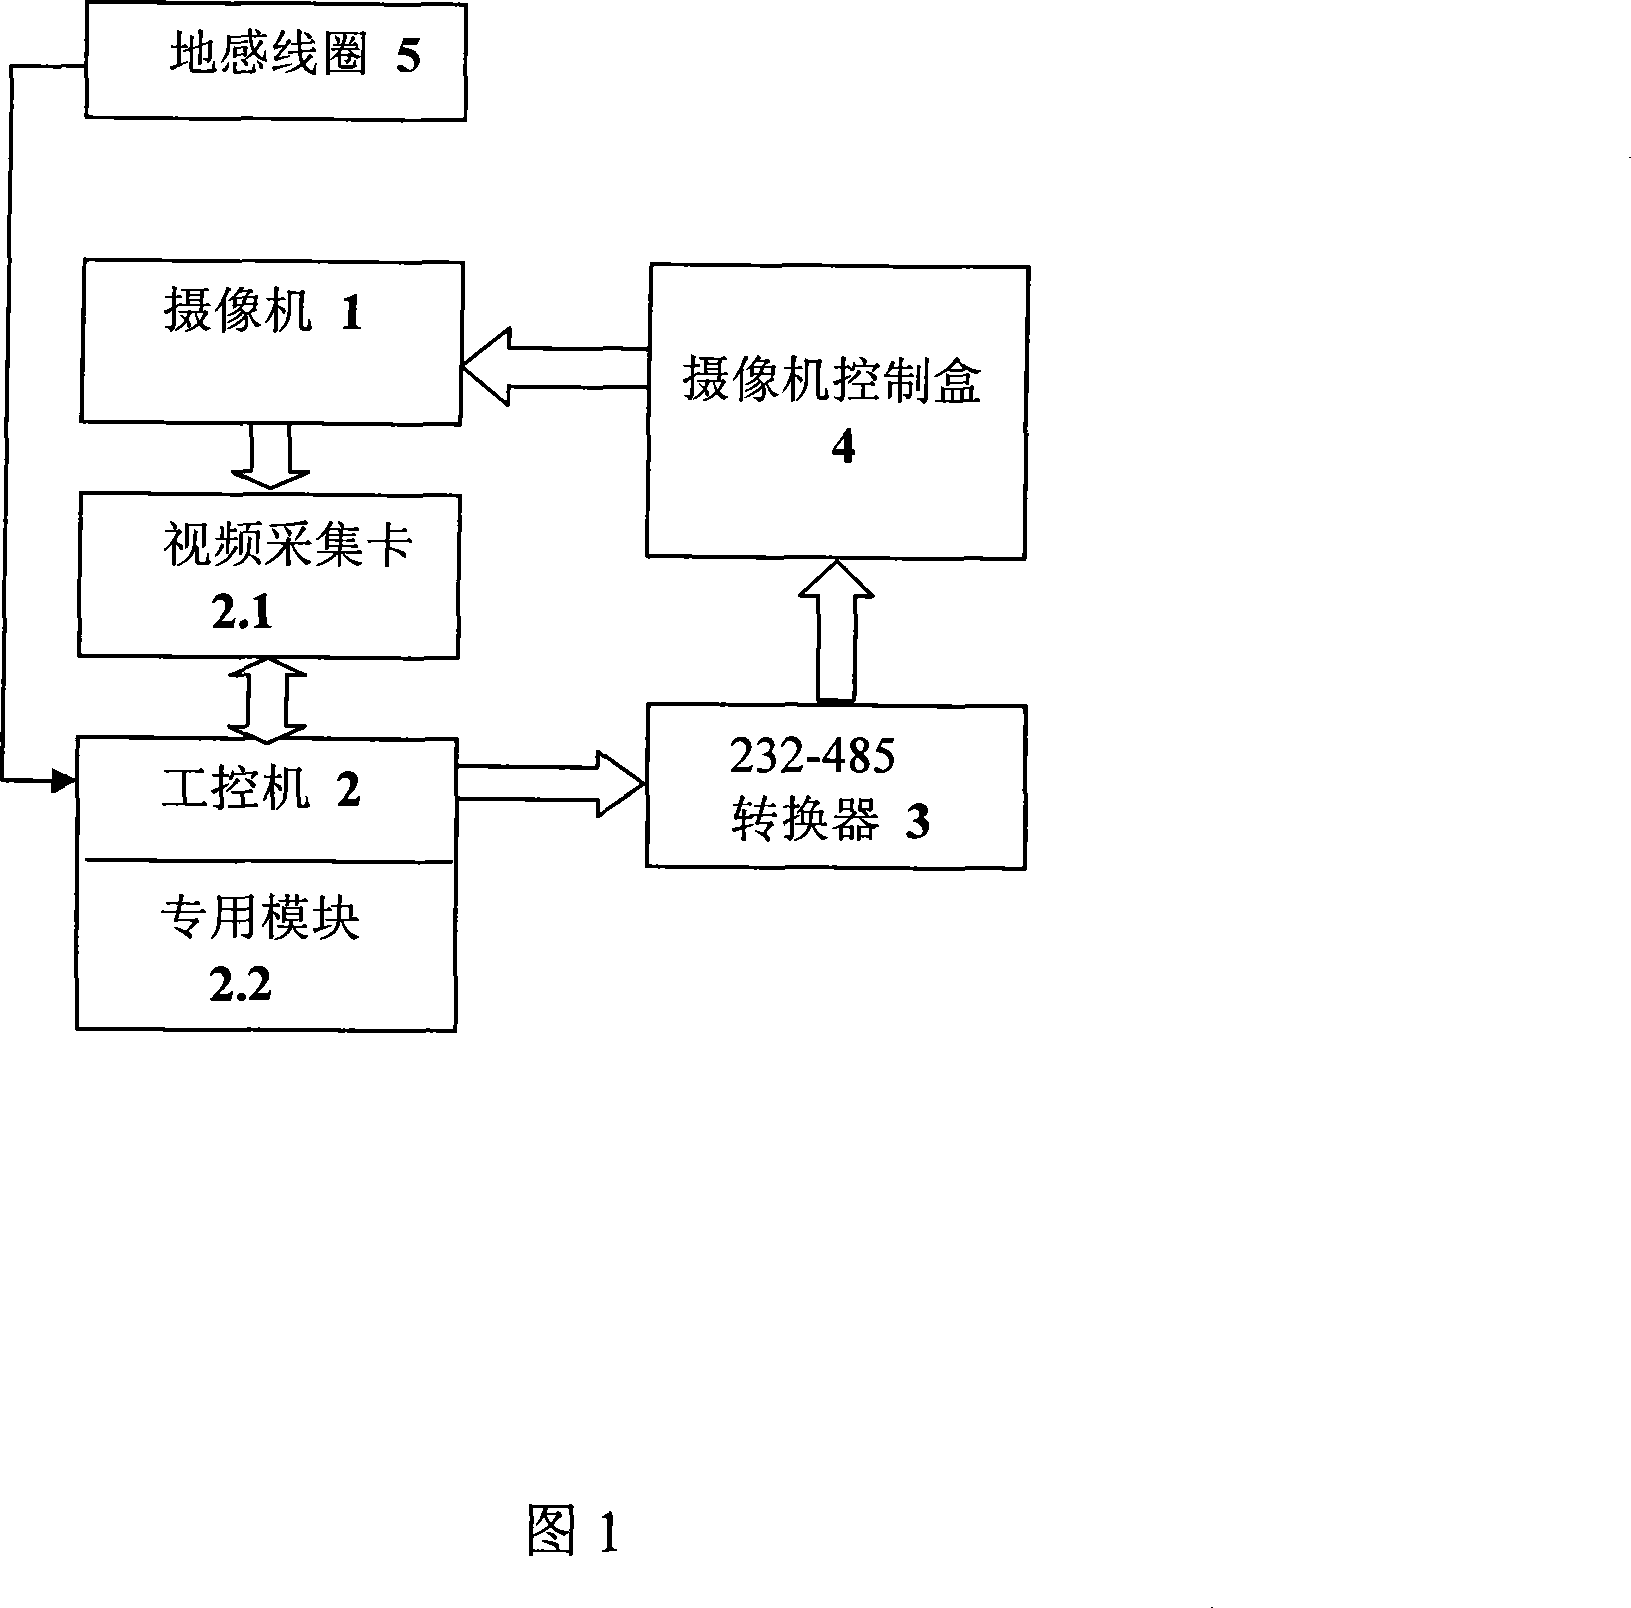 License plate luminance contrast based camera shutter and gain composite control method